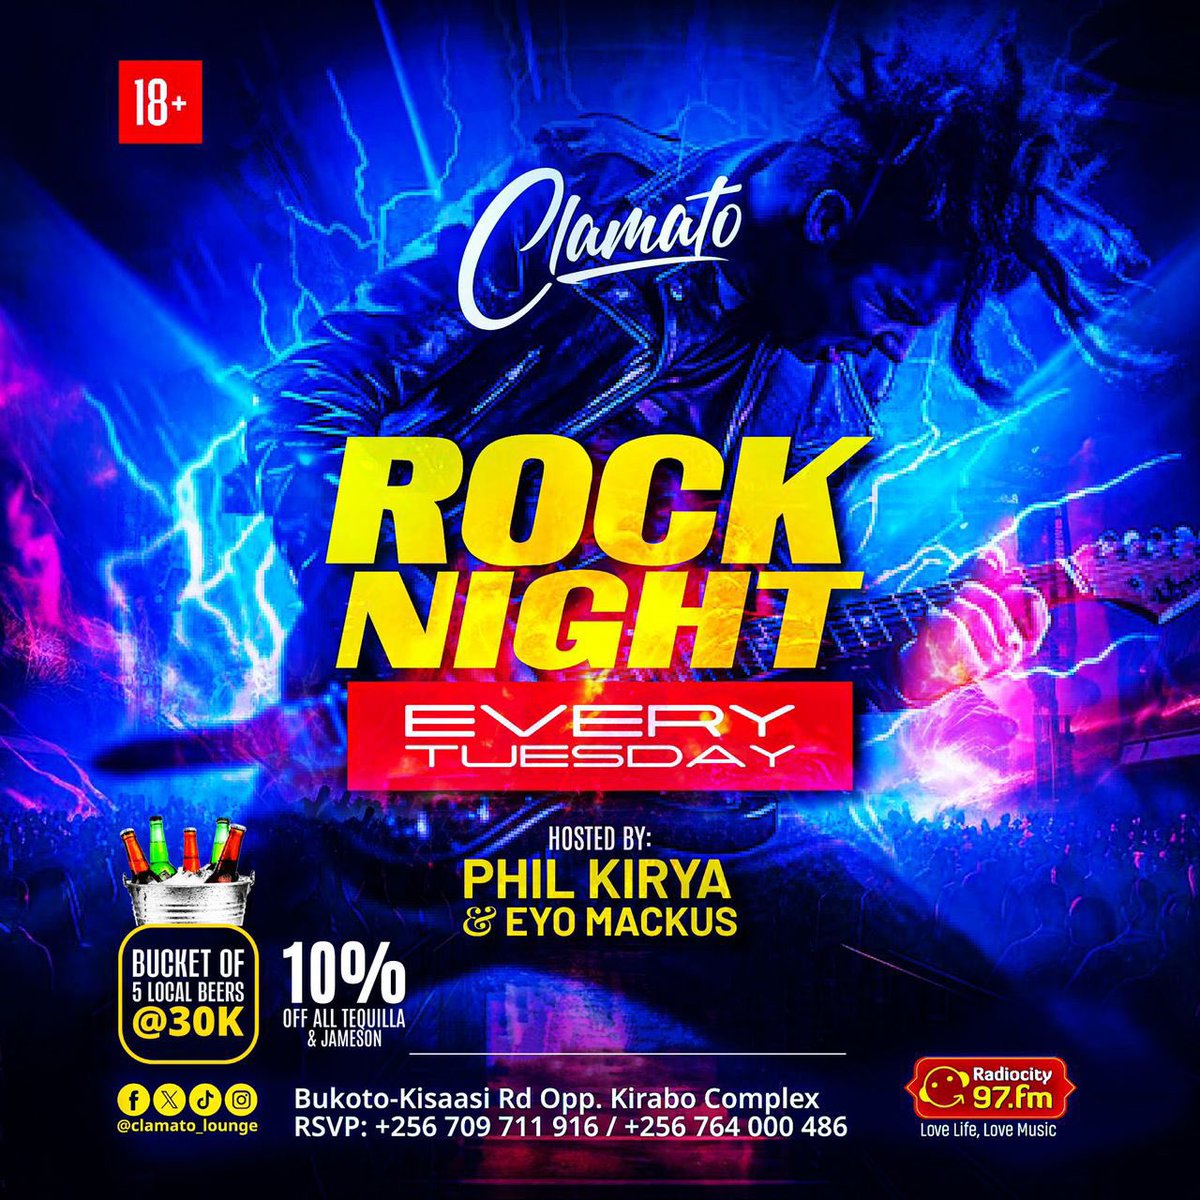 This is how we enjoy rock music every Tuesday with our finest deejays, @PhilKirya and @EyoMackus 🎉 Good vibes, good music and bucket night with 

*5 local beers of your choice at 30k. 

#ClamatoRockTuesdays 

@clamato_lounge is located in Bukoto opposite Kirabo complex.